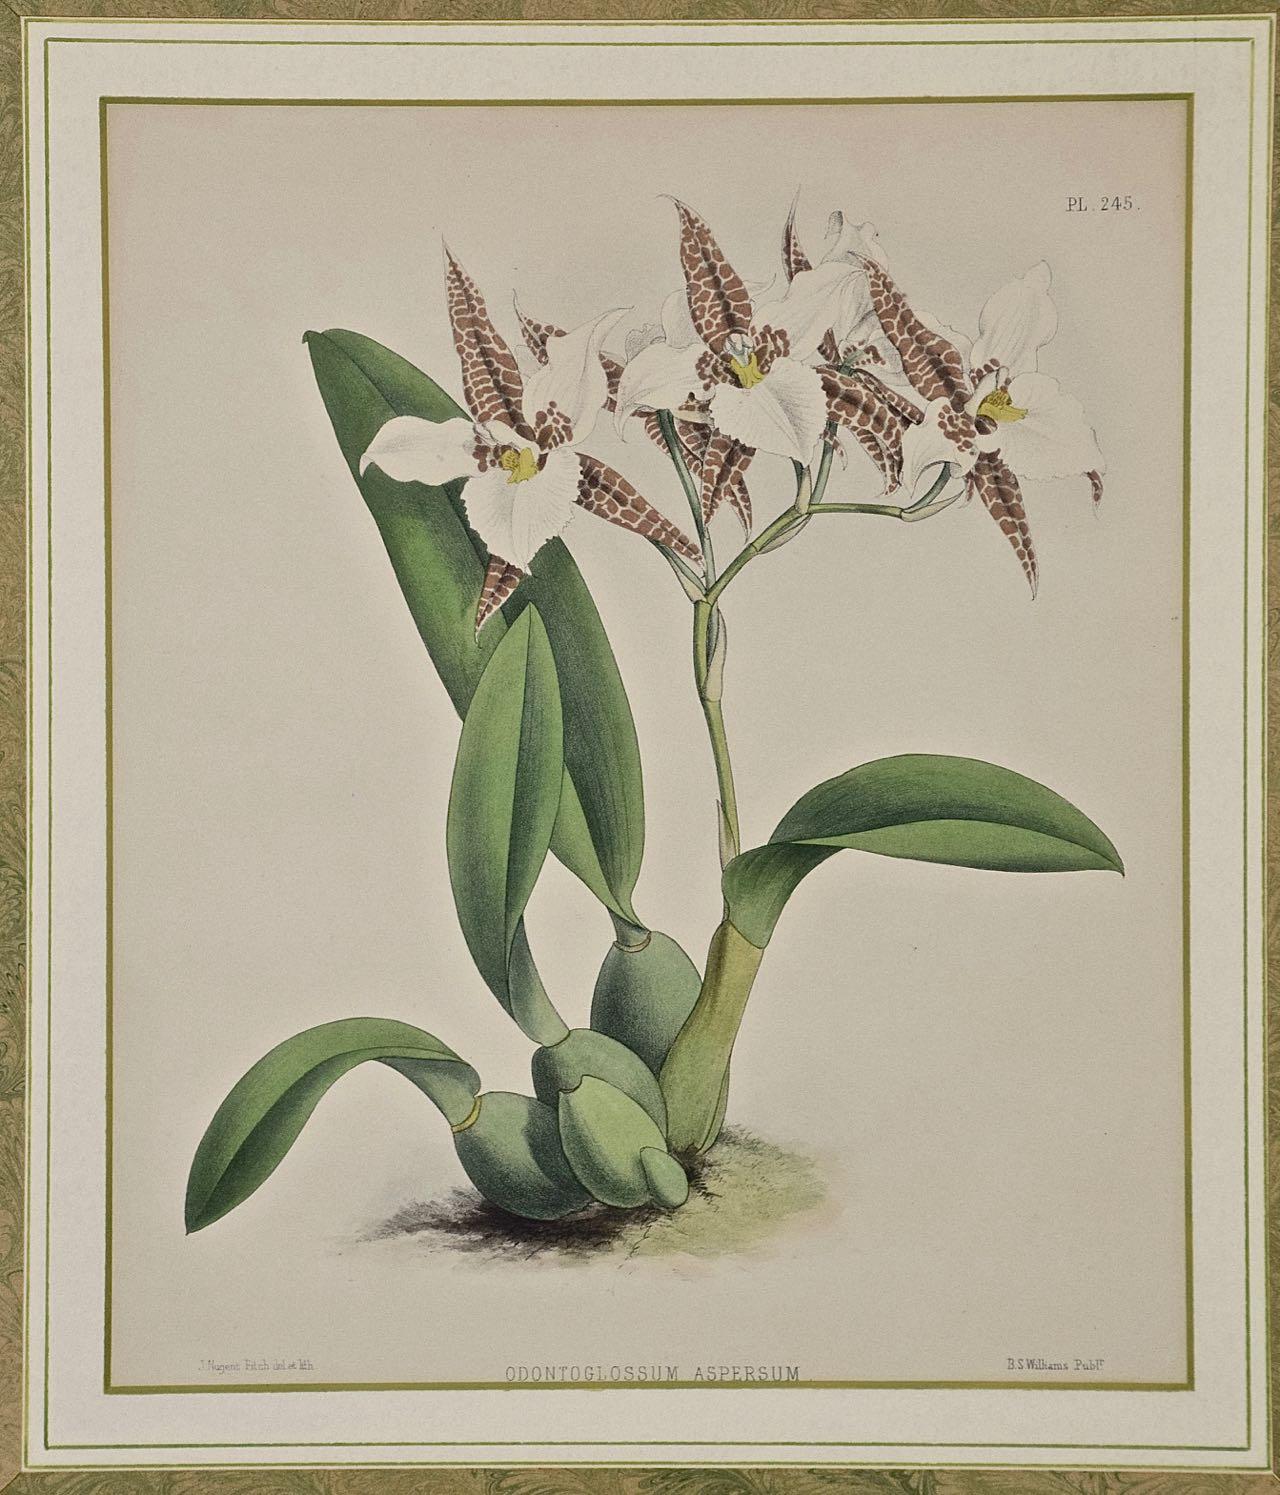  Orchids: Framed 19th C. Hand-Colored lithograph of 